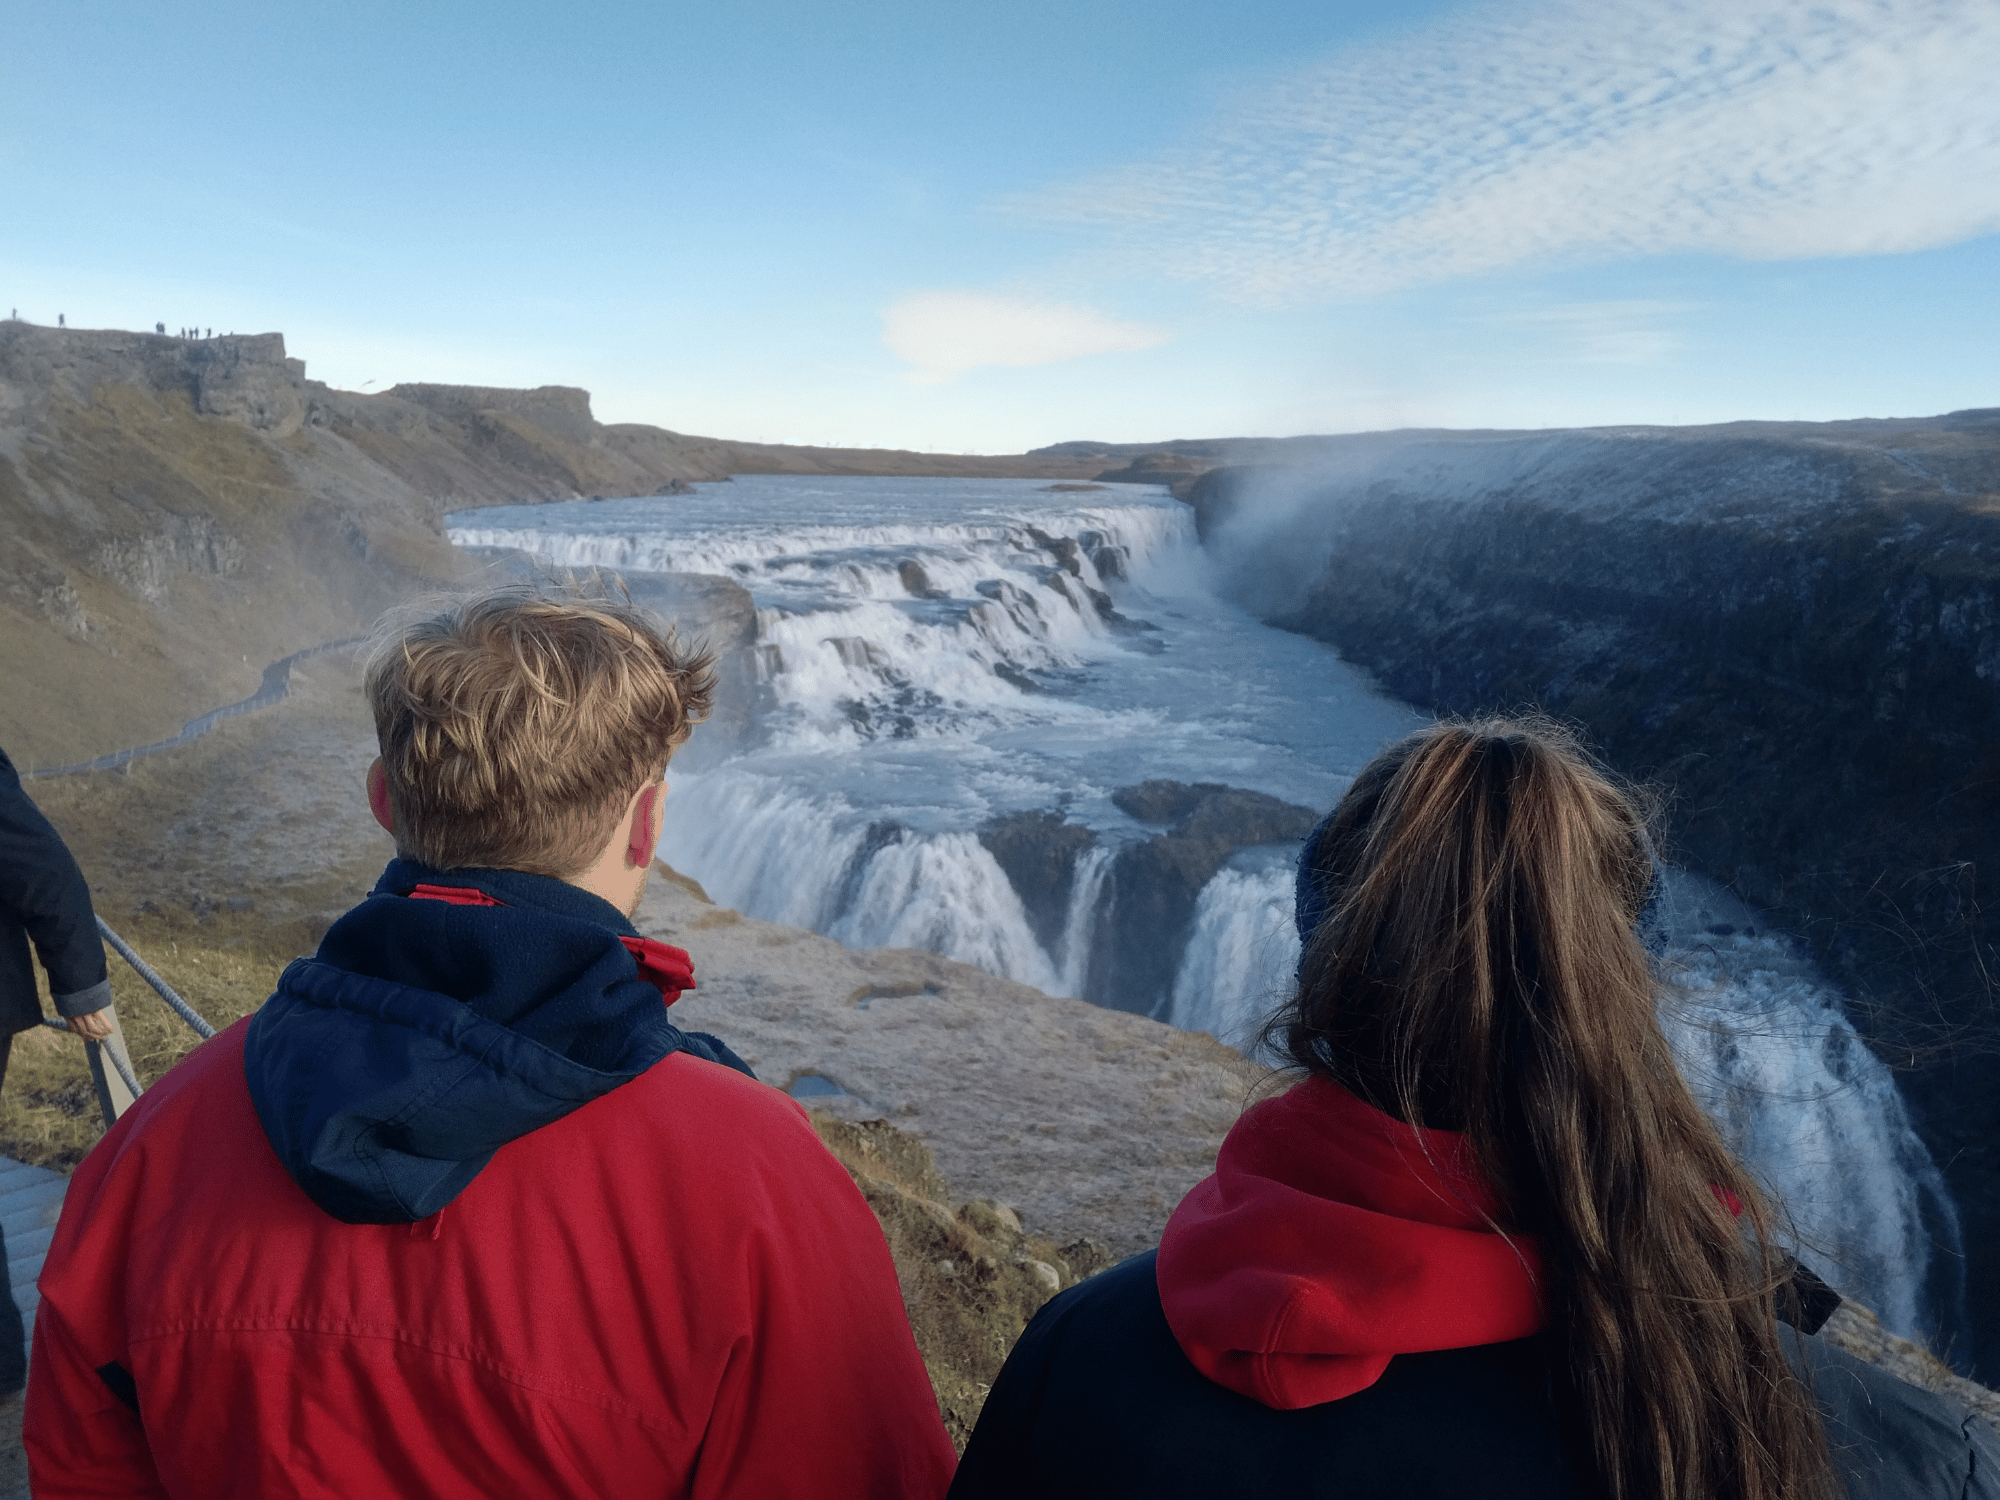 Geography Trip to Iceland